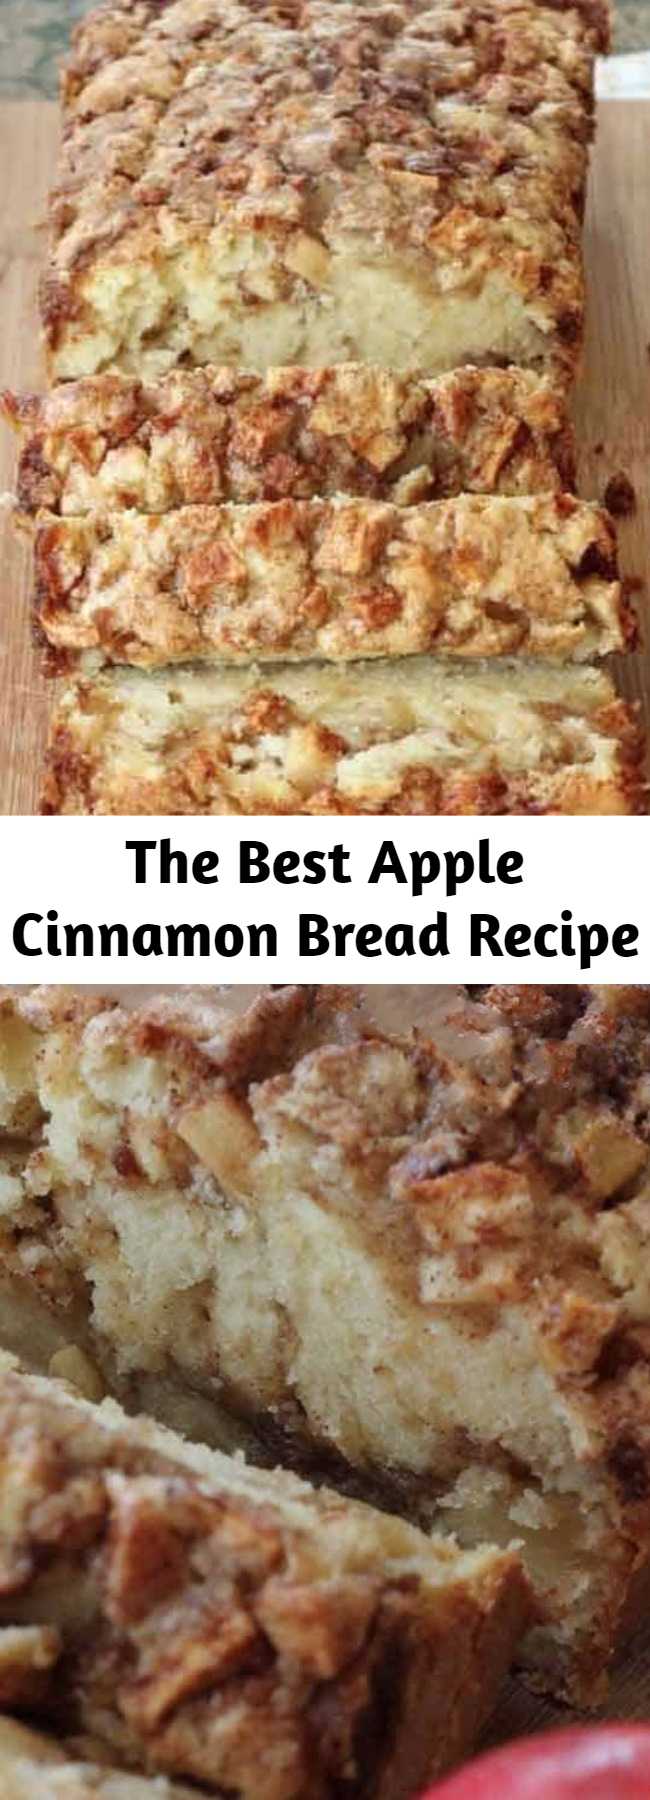 The Best Apple Cinnamon Bread Recipe - This is the absolute BEST Apple Bread on the internet. Swirled with cinnamon sugar and juicy apple pieces, try this Apple Bread recipe out and see why it has over 250 amazing reviews!